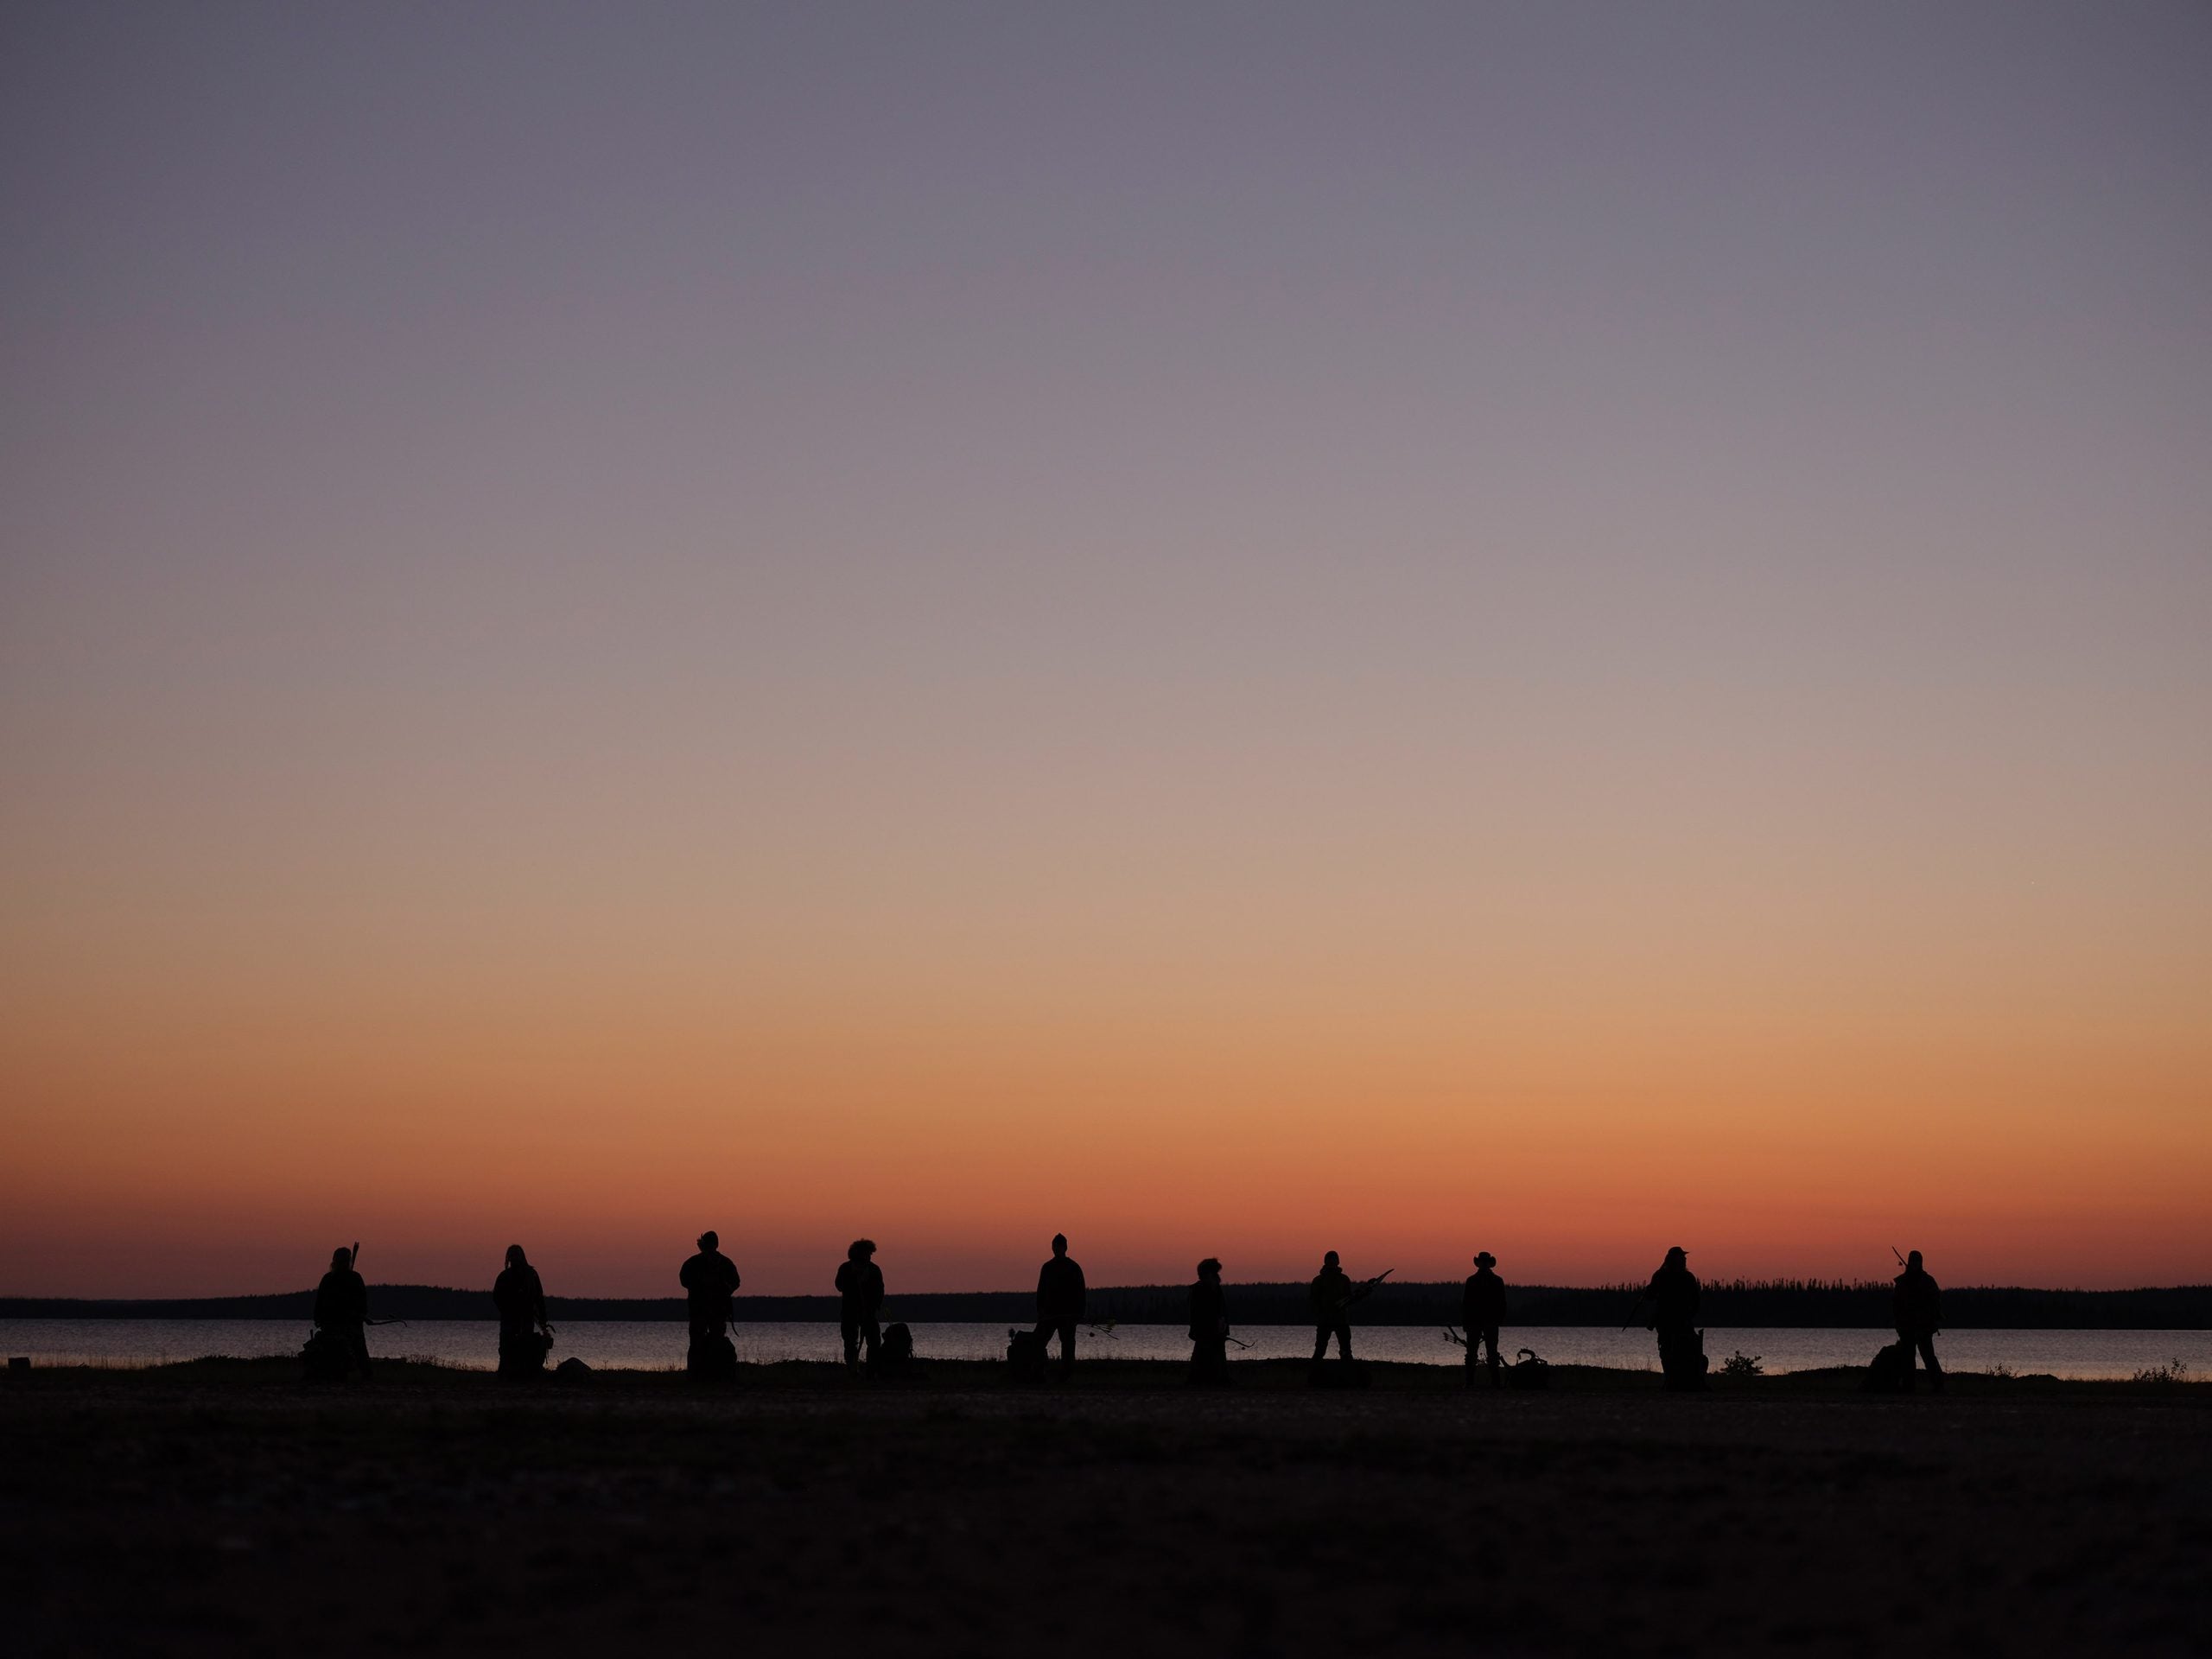 'Alone' Season 10 cast members silhouetted against the sunset